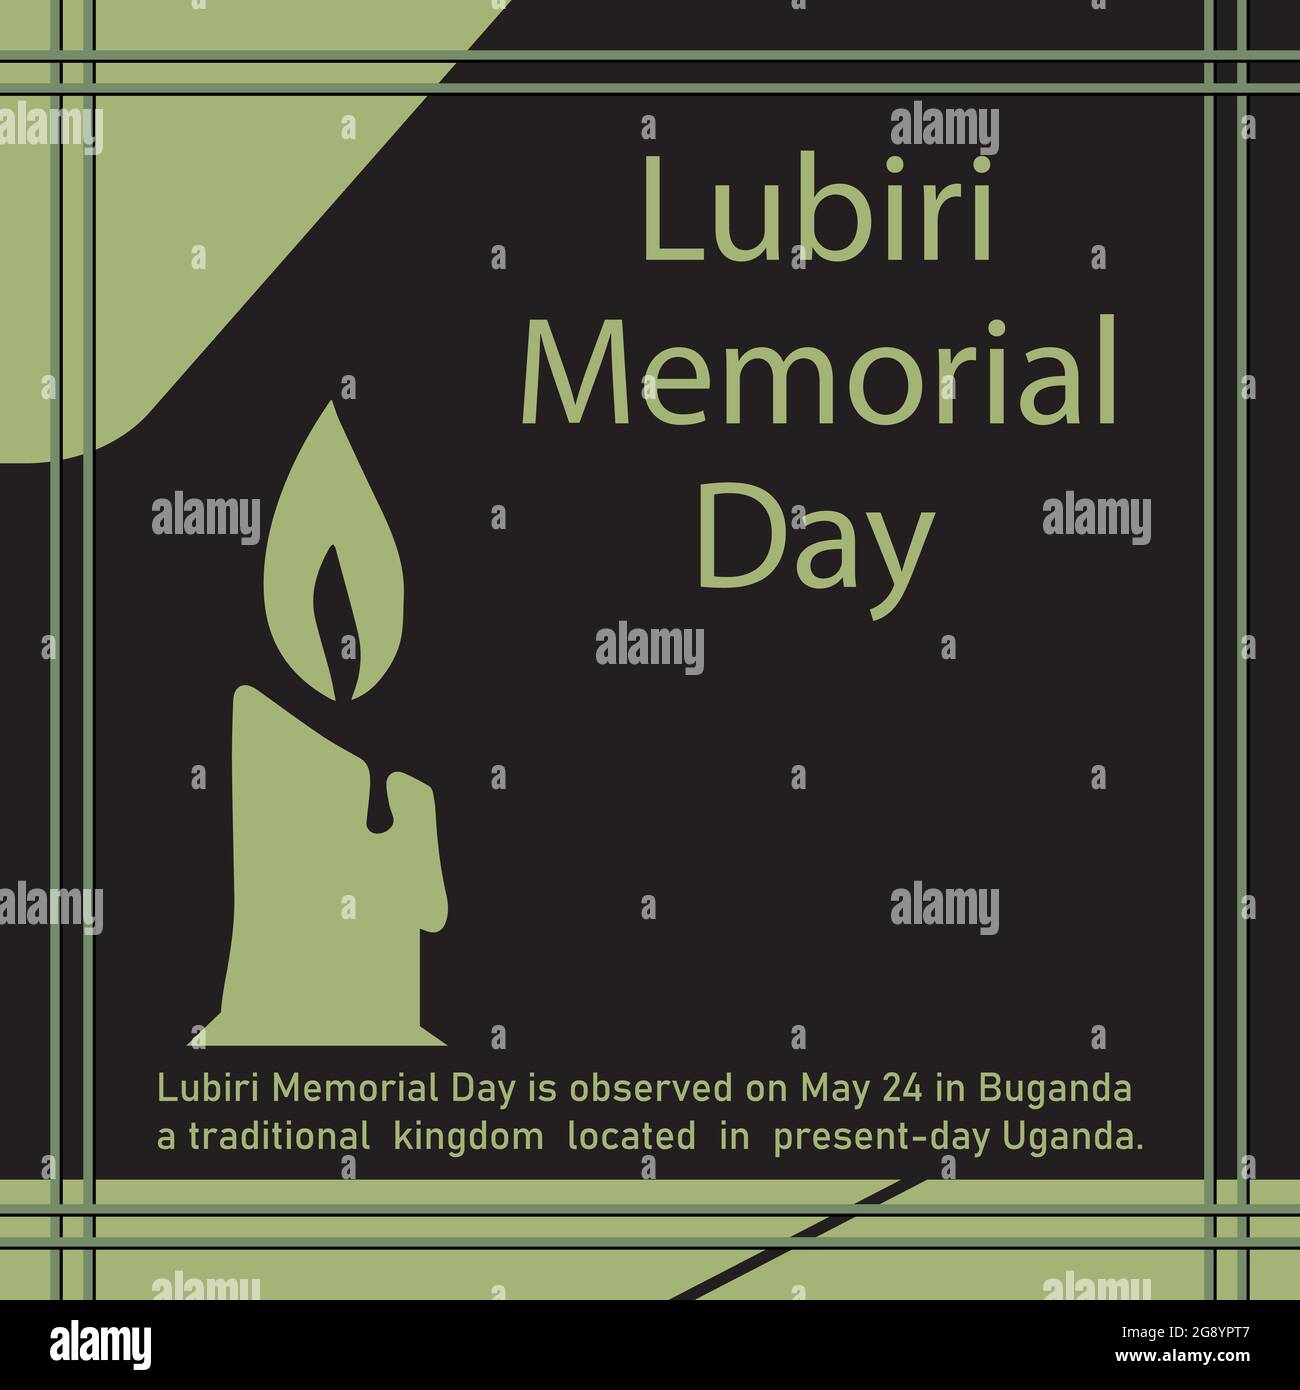 Lubiri Memorial Day is observed on May 24 in Buganda, a traditional kingdom located in present-day Uganda. Stock Vector